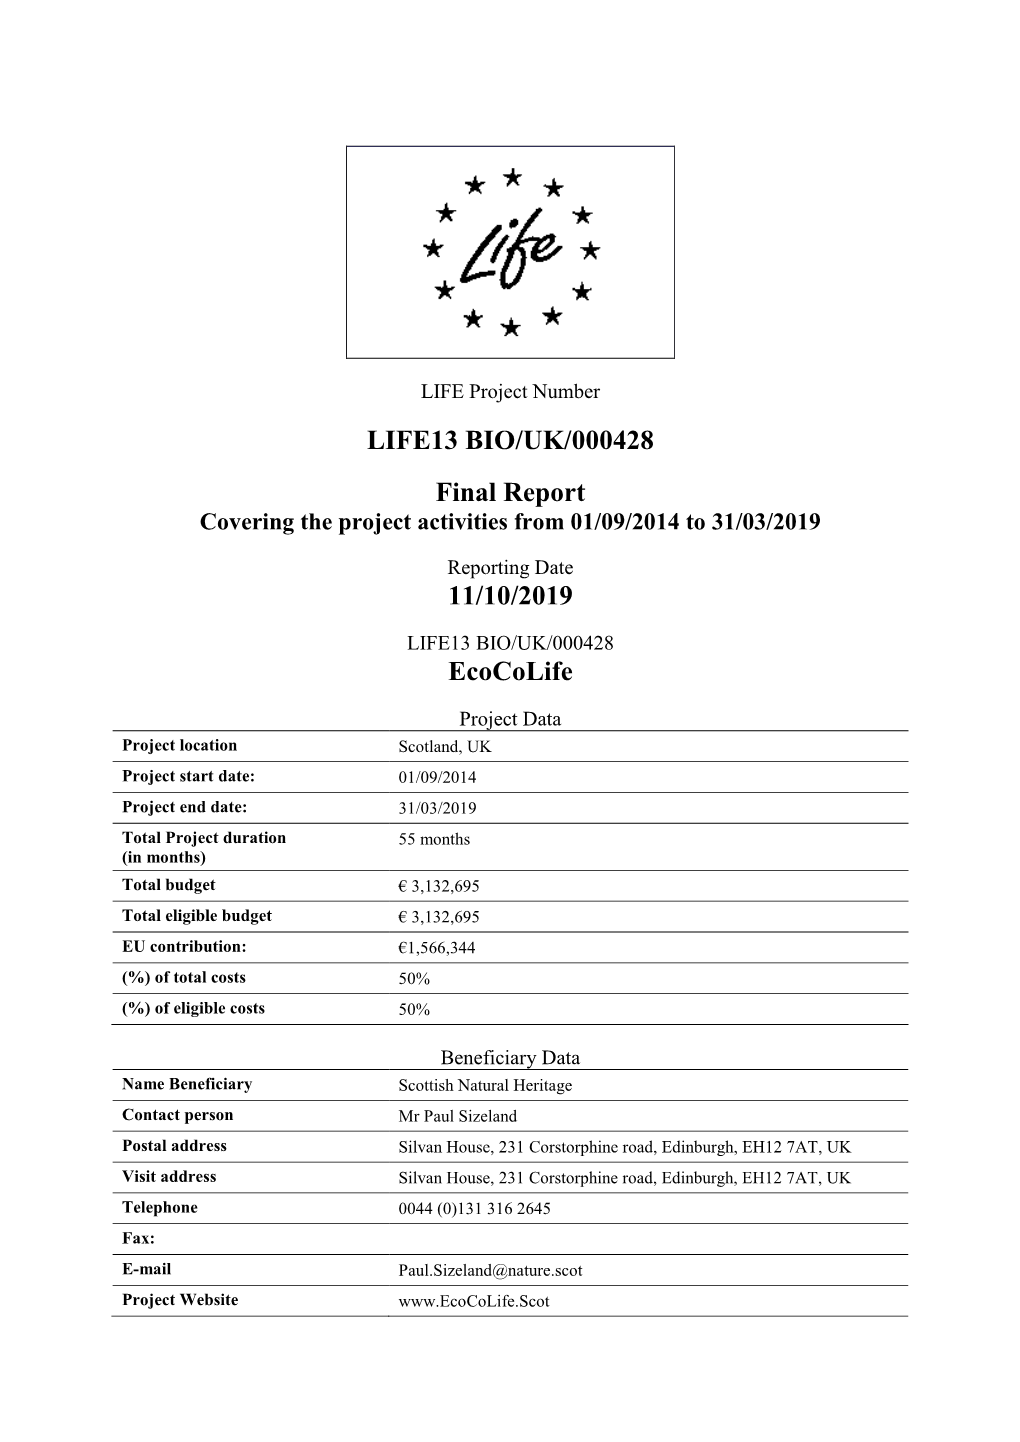 LIFE+ Programme Common Provisions, the National Legislation and Accounting Rules